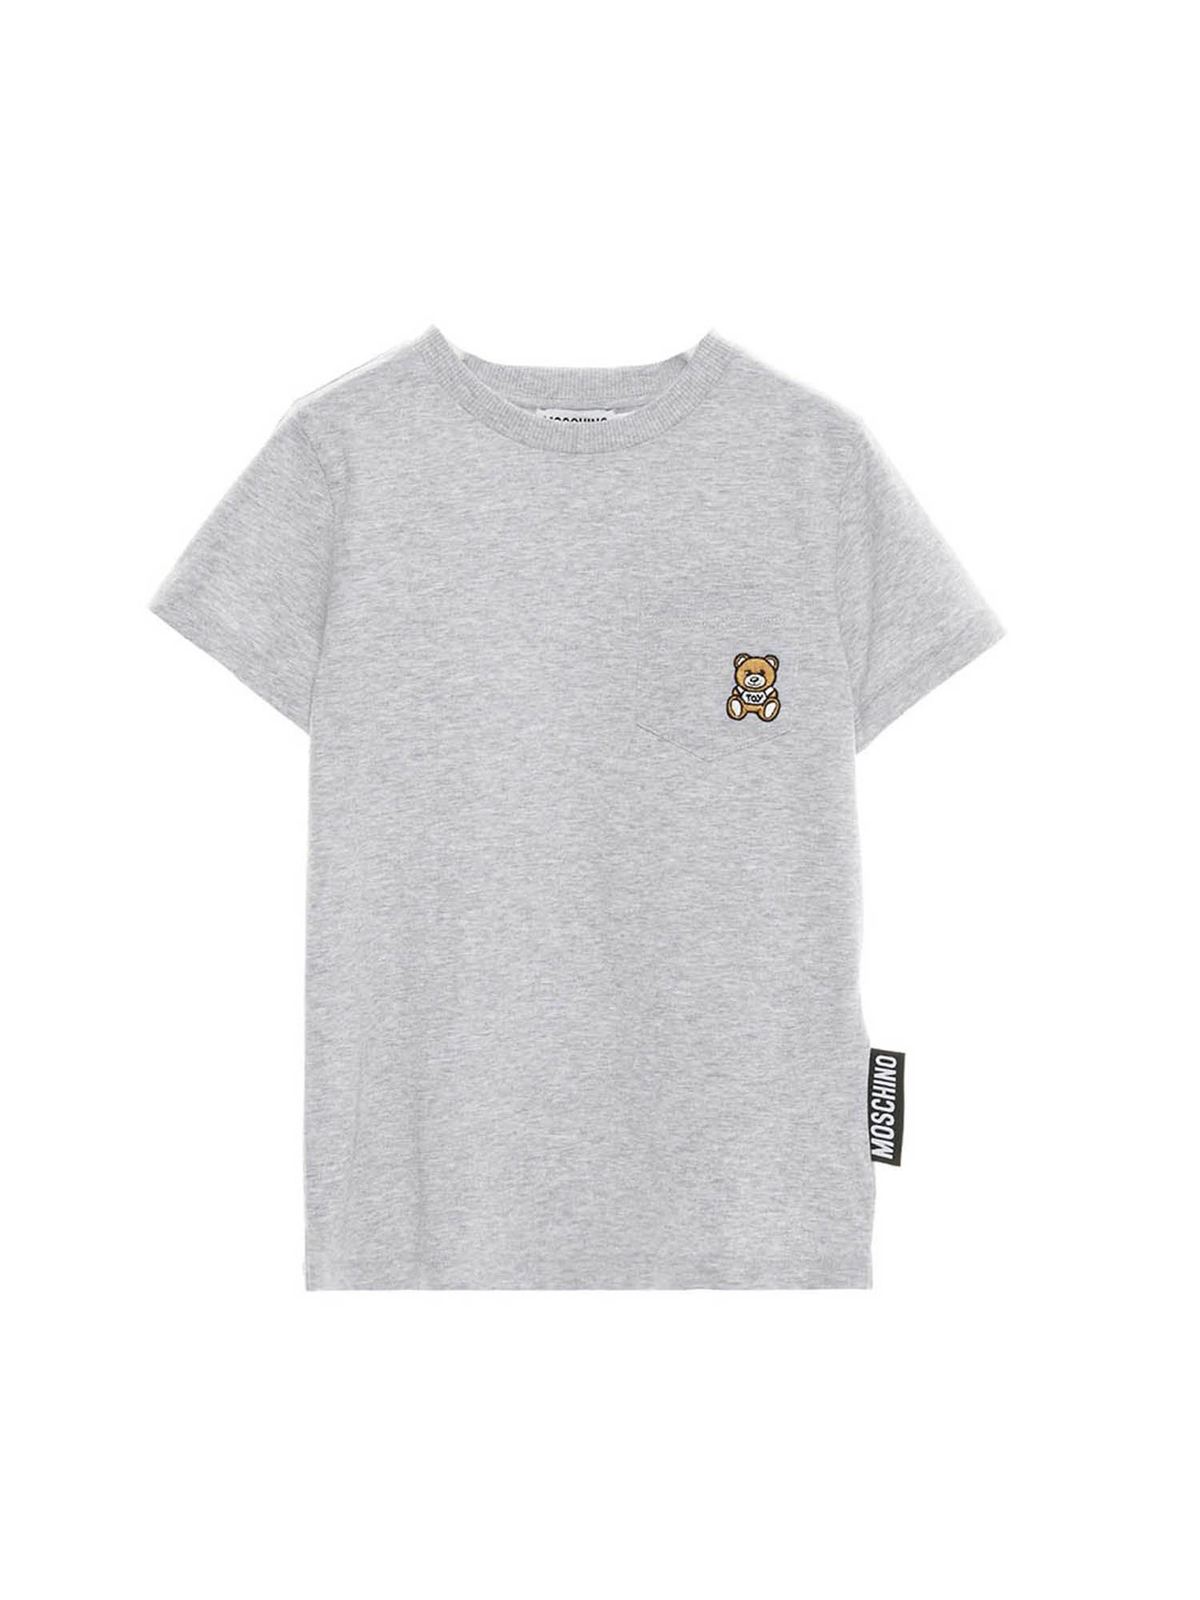 MOSCHINO BRANDED POCKET T-SHIRT IN GREY